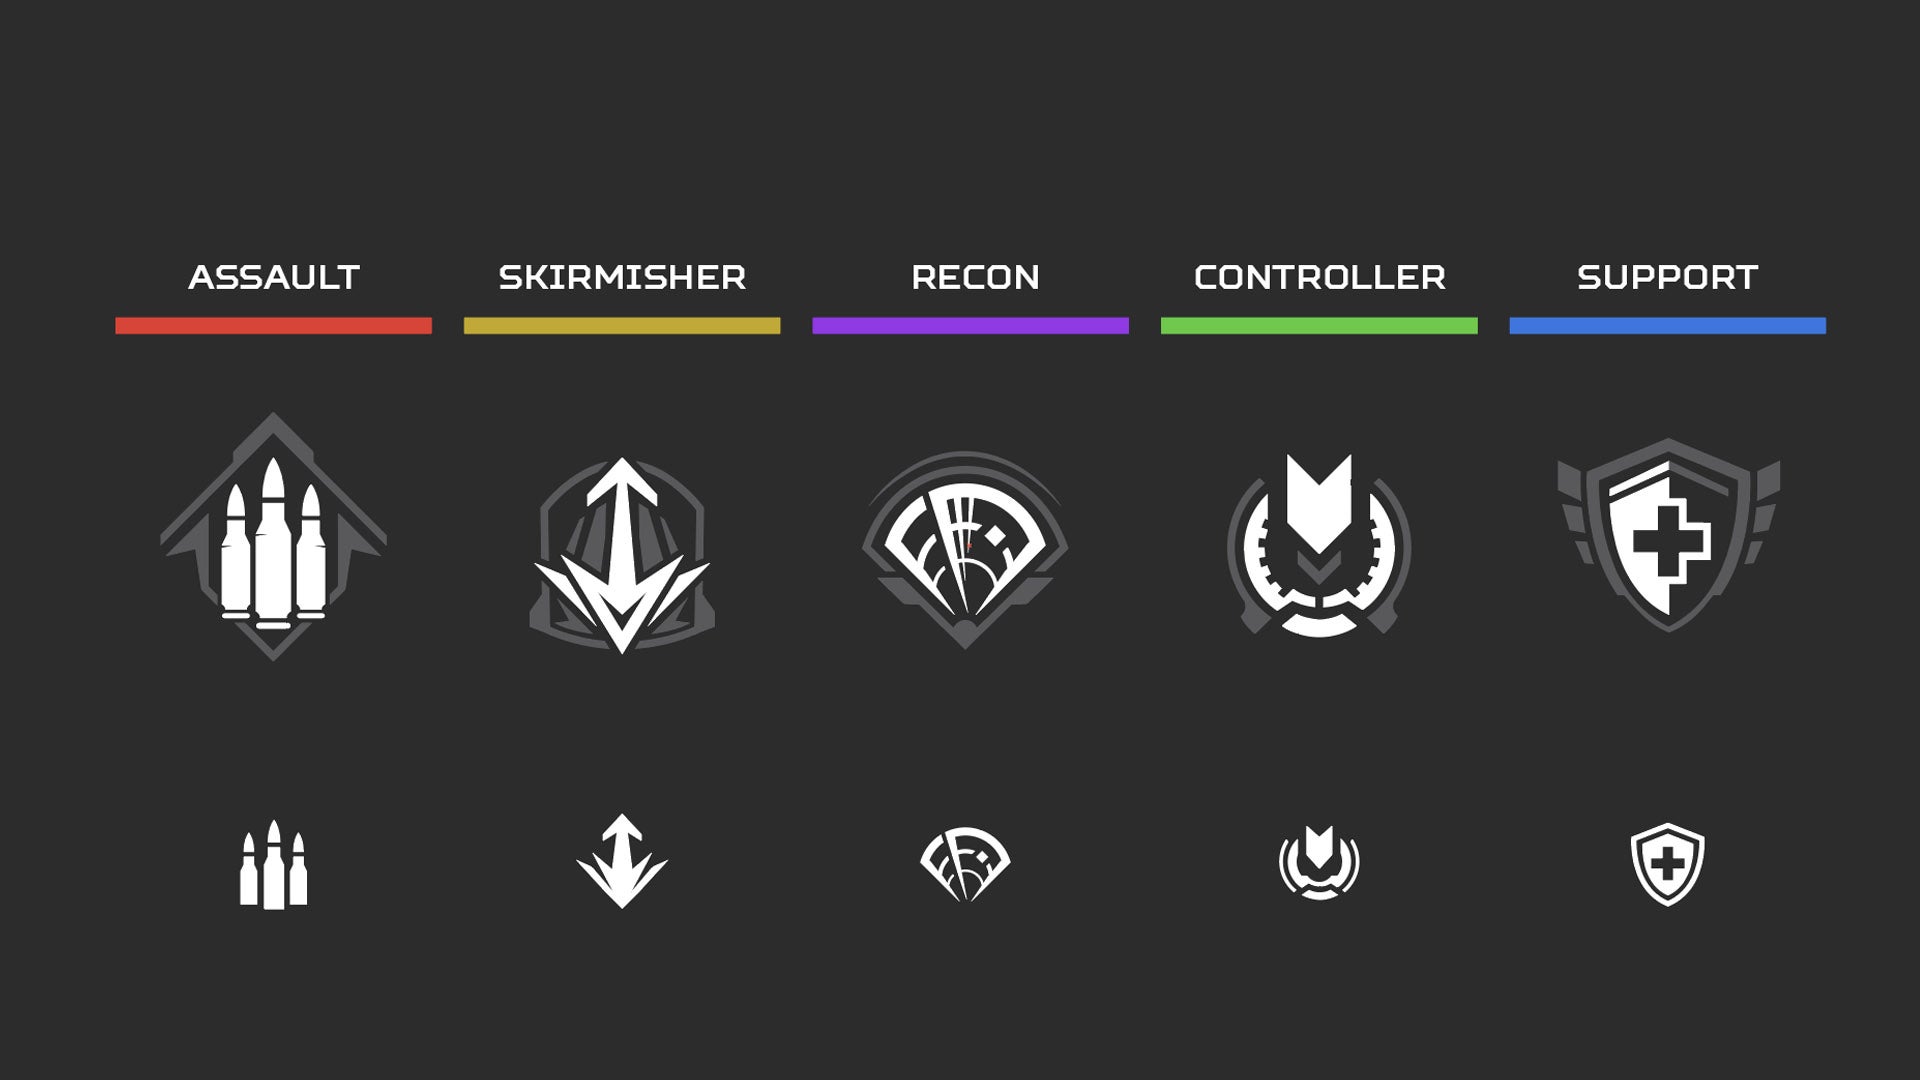 Apex Legends official respawn artwork of the new class system icons.